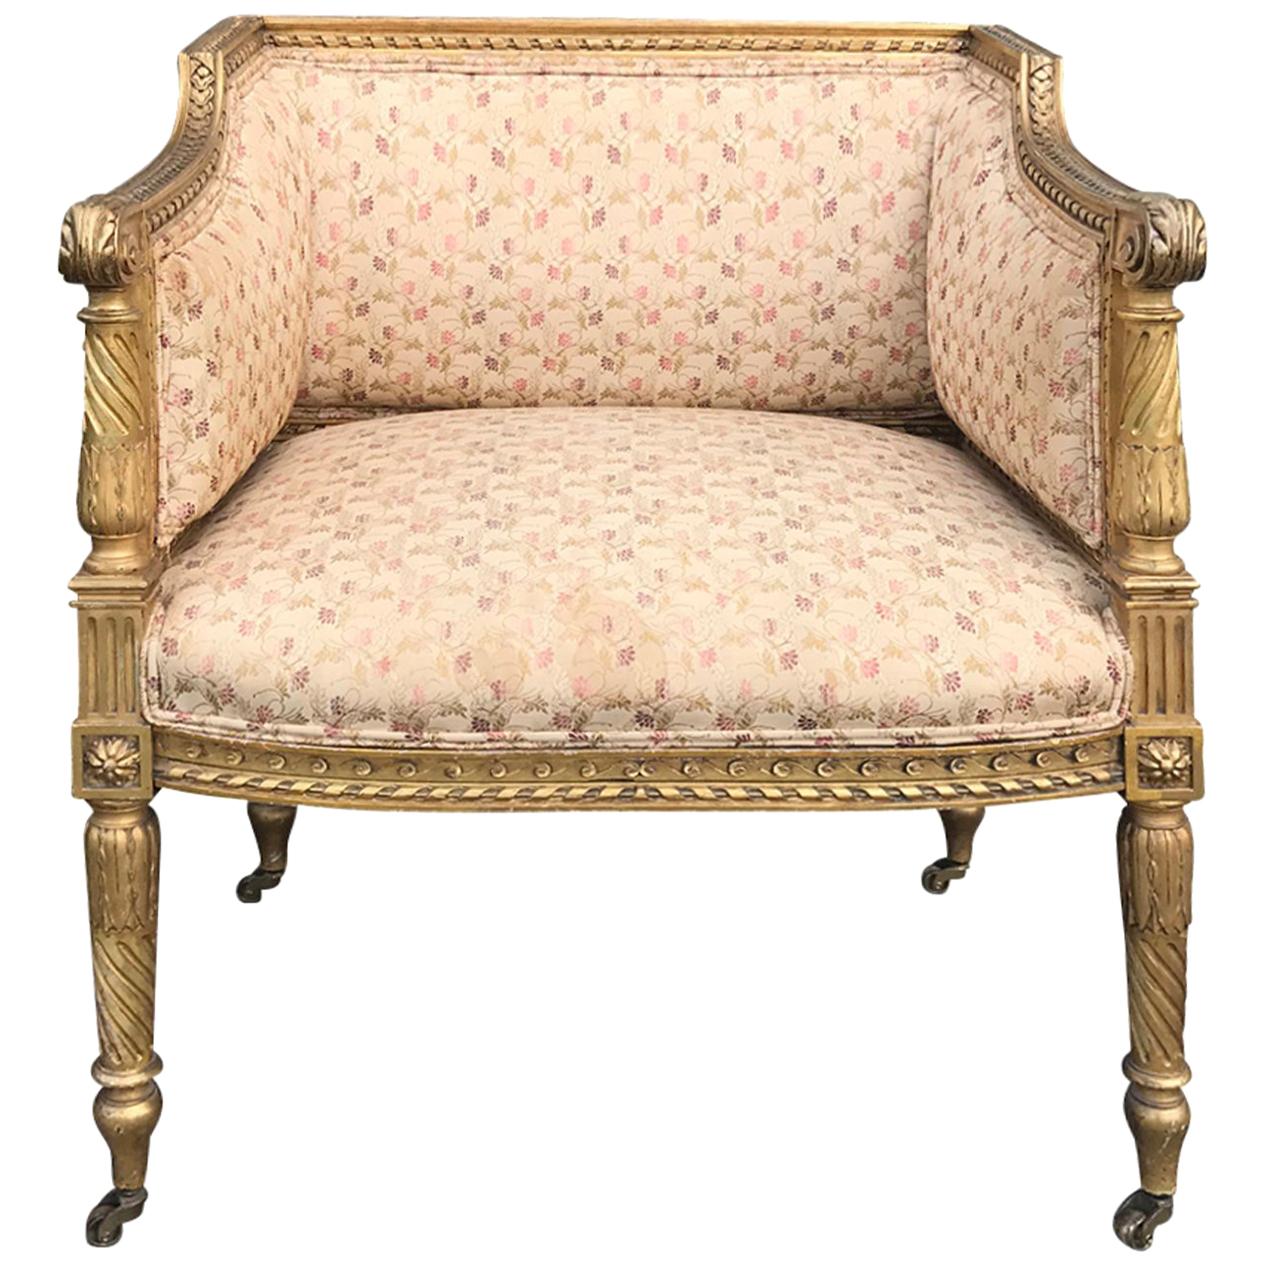 Late 19th-Early 20th Century Louis XVI Small Chair